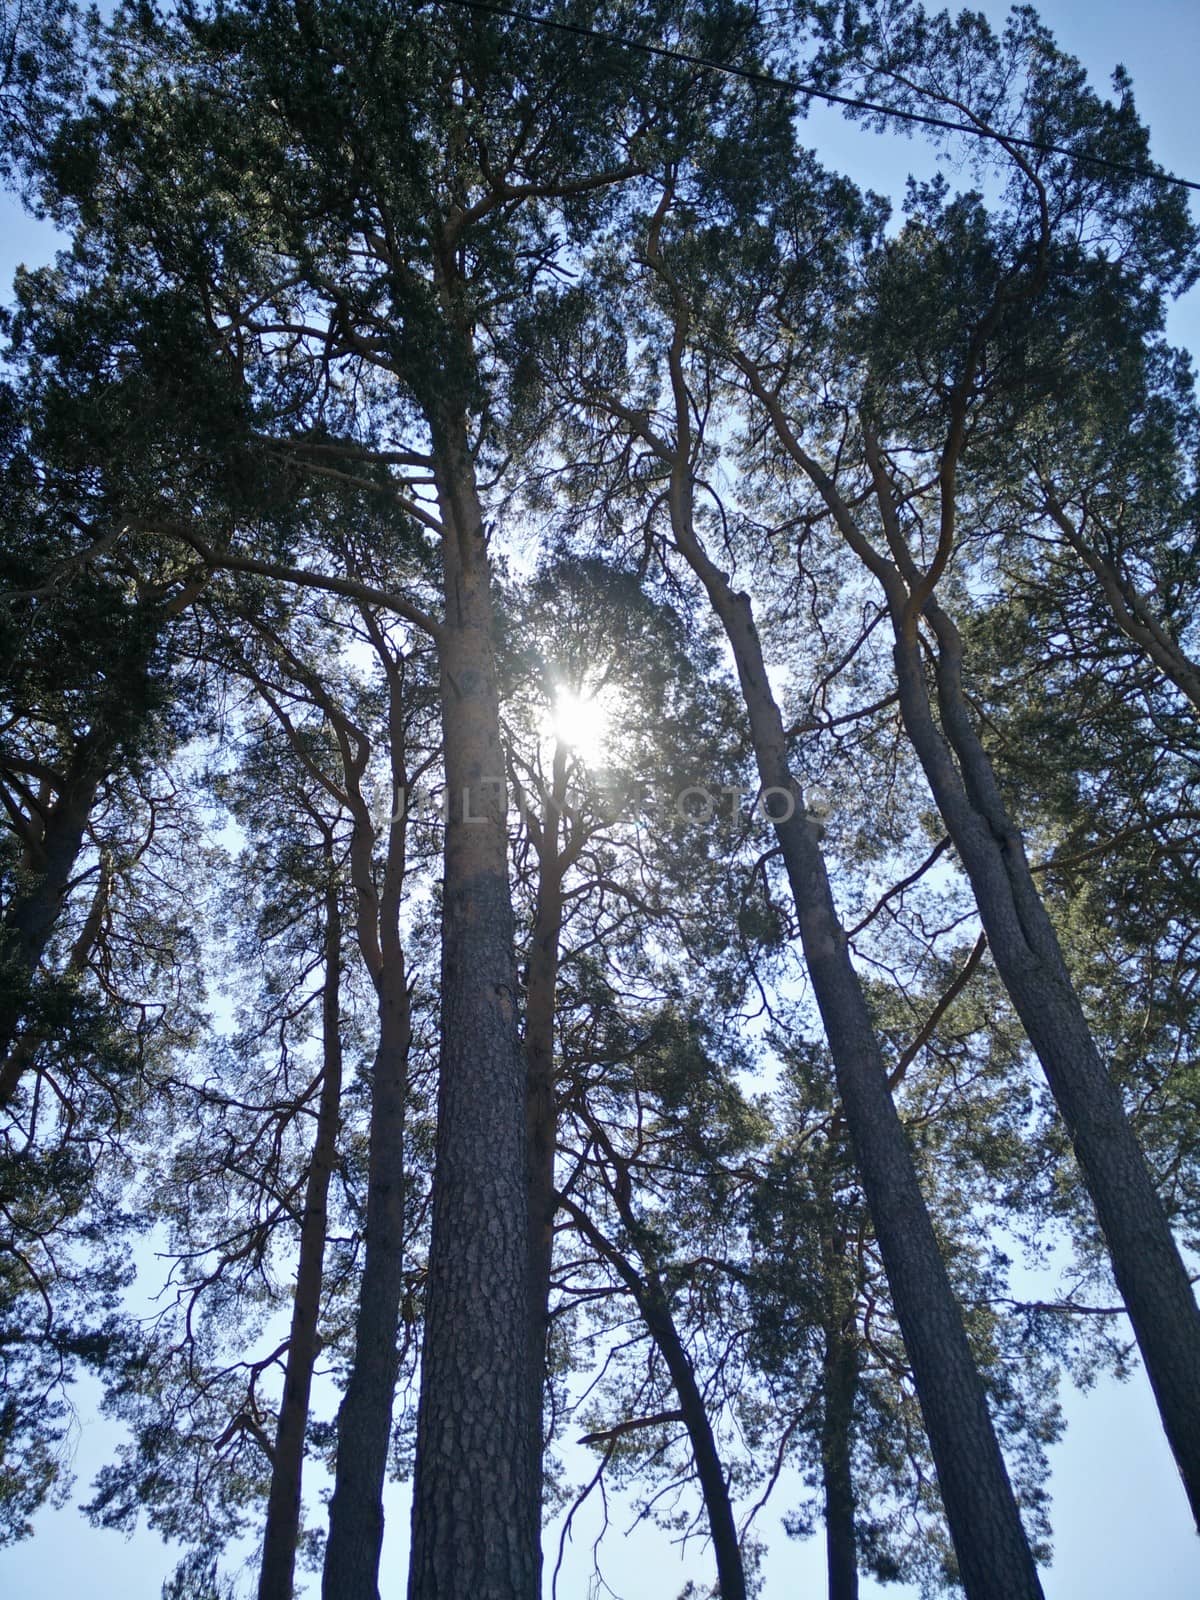 Sun and trees in the summer